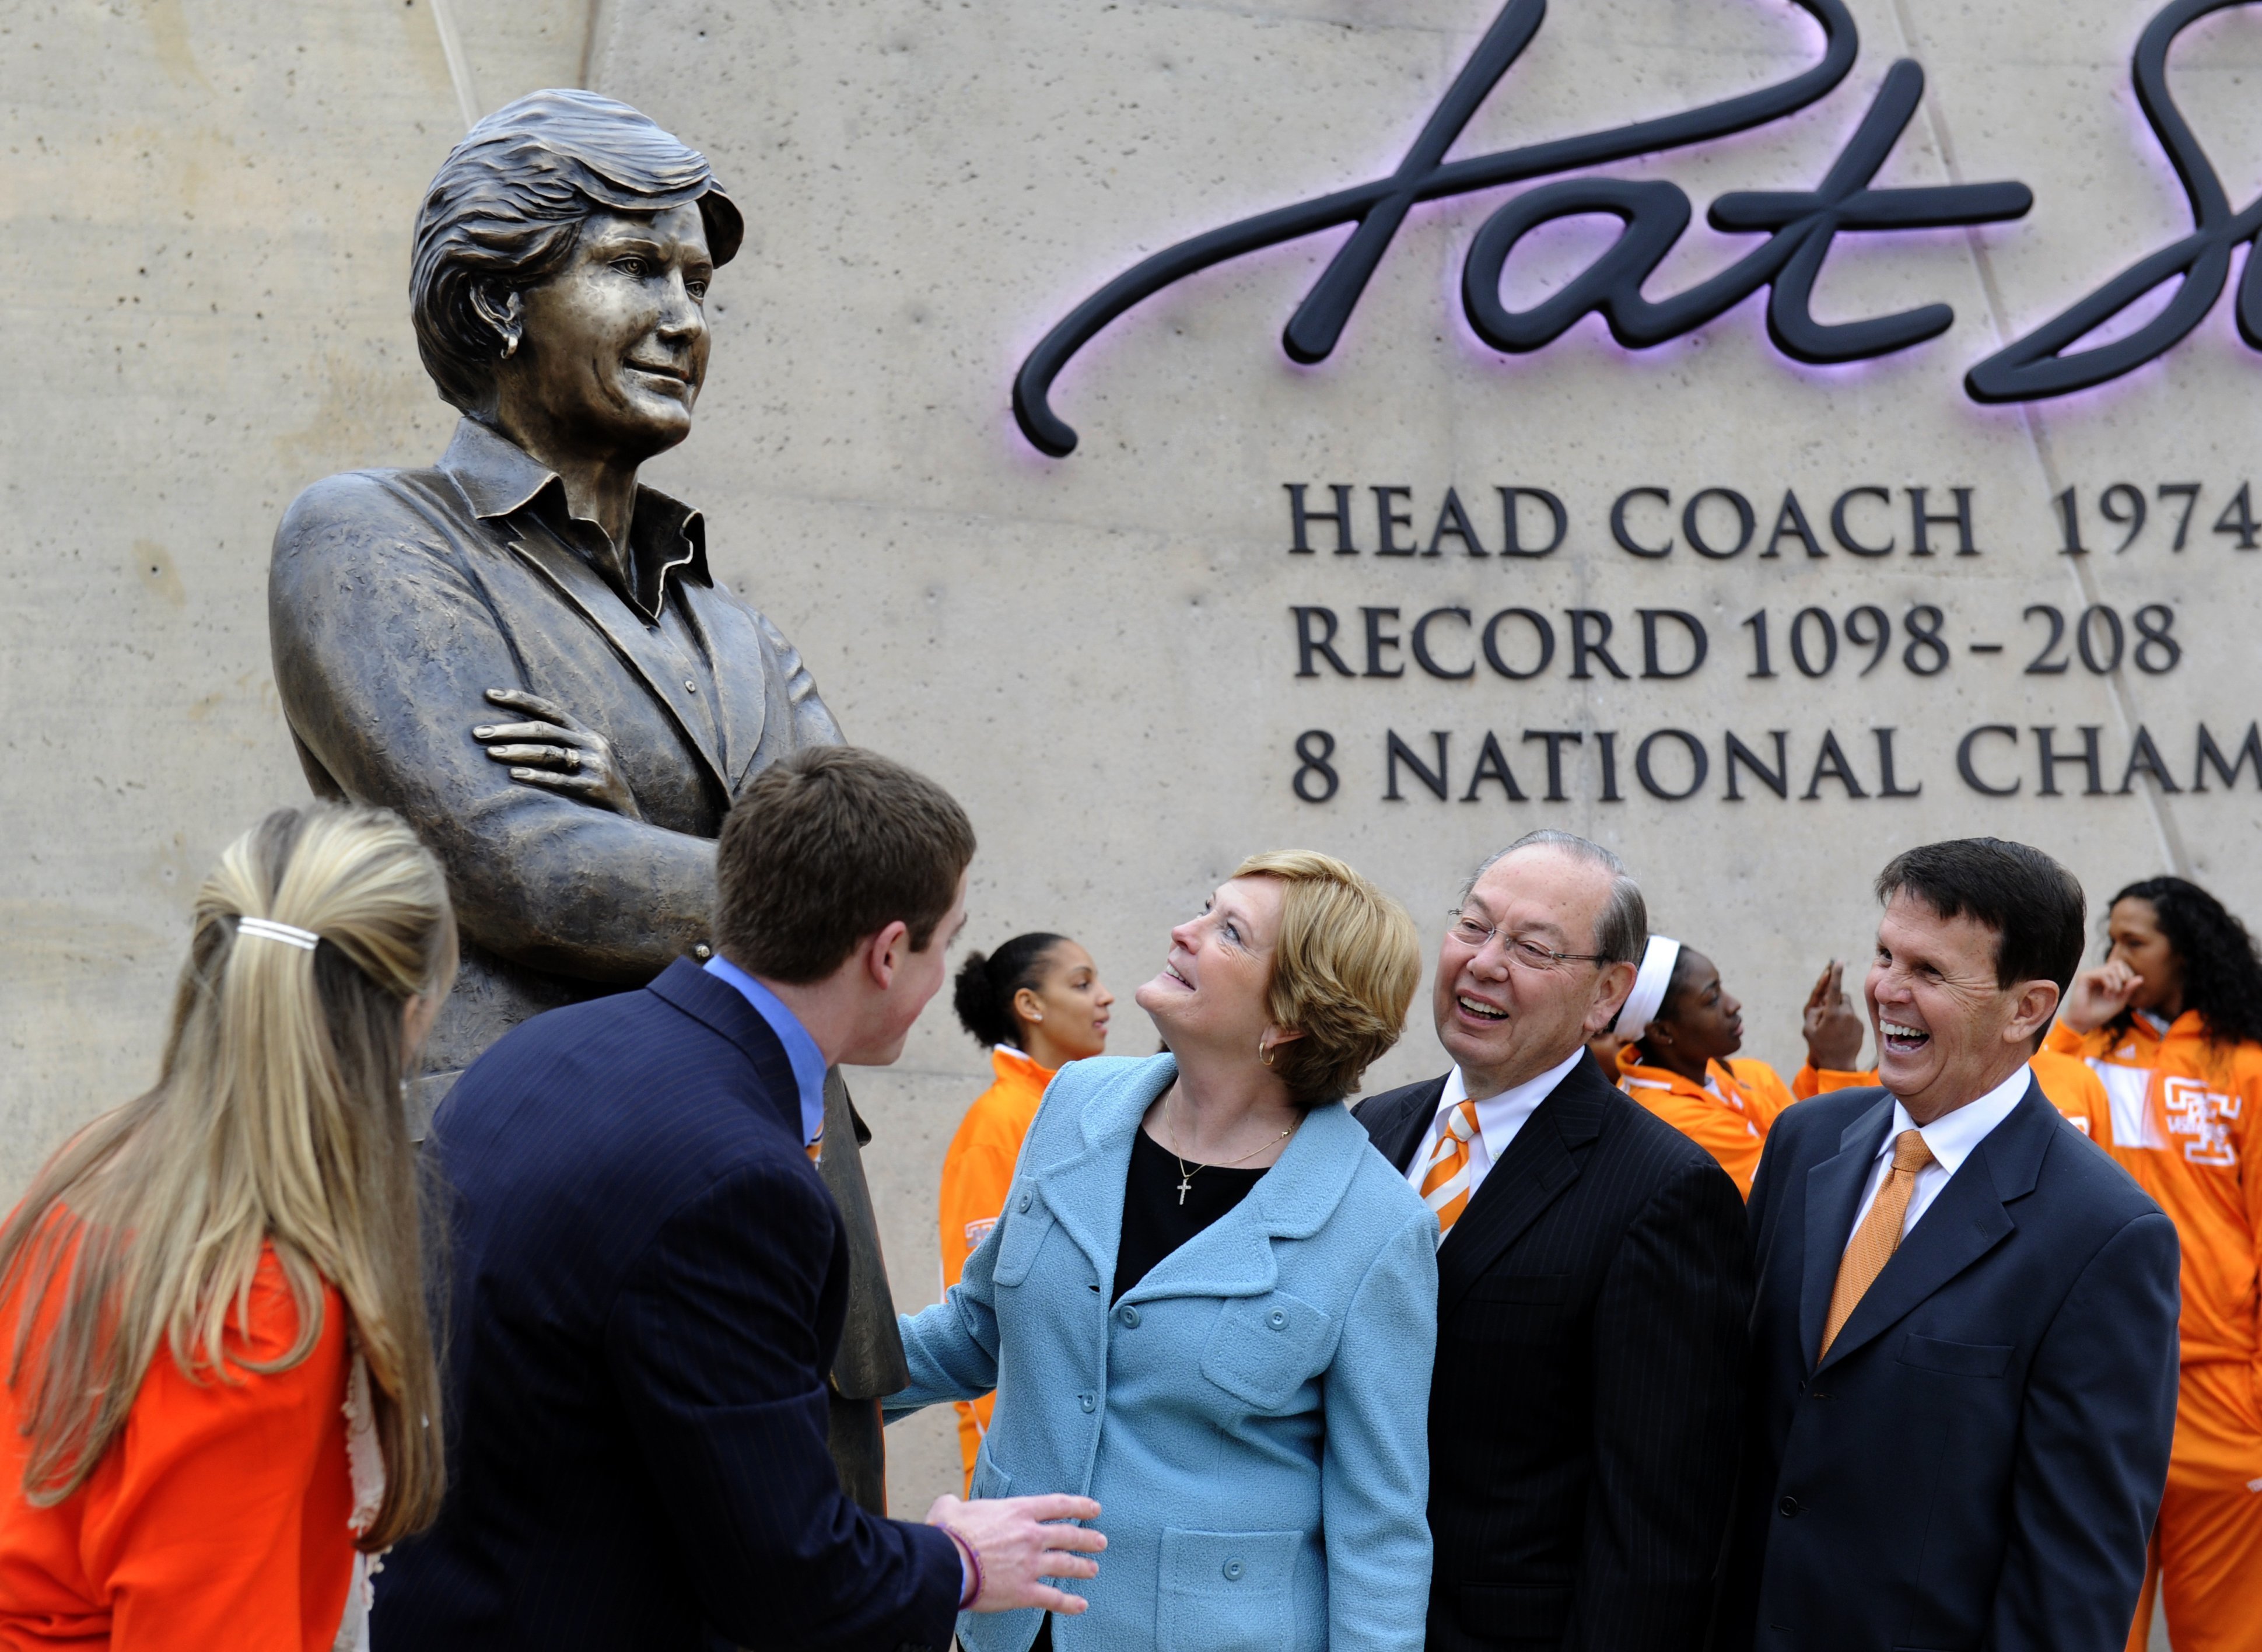 FILE - In this Nov. 22, 2013, file photo, Tennessee women's basketball coach emeritus Pat Summitt, center, looks at the statue unveiled in her honor, in Knoxville, Tenn. With Summitt are, from left, her daughter-in-law AnDe Summitt, son Tyler Summitt, UT Chancellor Jimmy Cheek, and director of athletics Dave Hart. Summitt, the winningest coach in Division I college basketball history who uplifted the women's game from obscurity to national prominence during her career at Tennessee, died Tuesday morning, June 28, 2016. She was 64. (Michael Patrick/Knoxville News Sentinel via AP) MANDATORY CREDIT